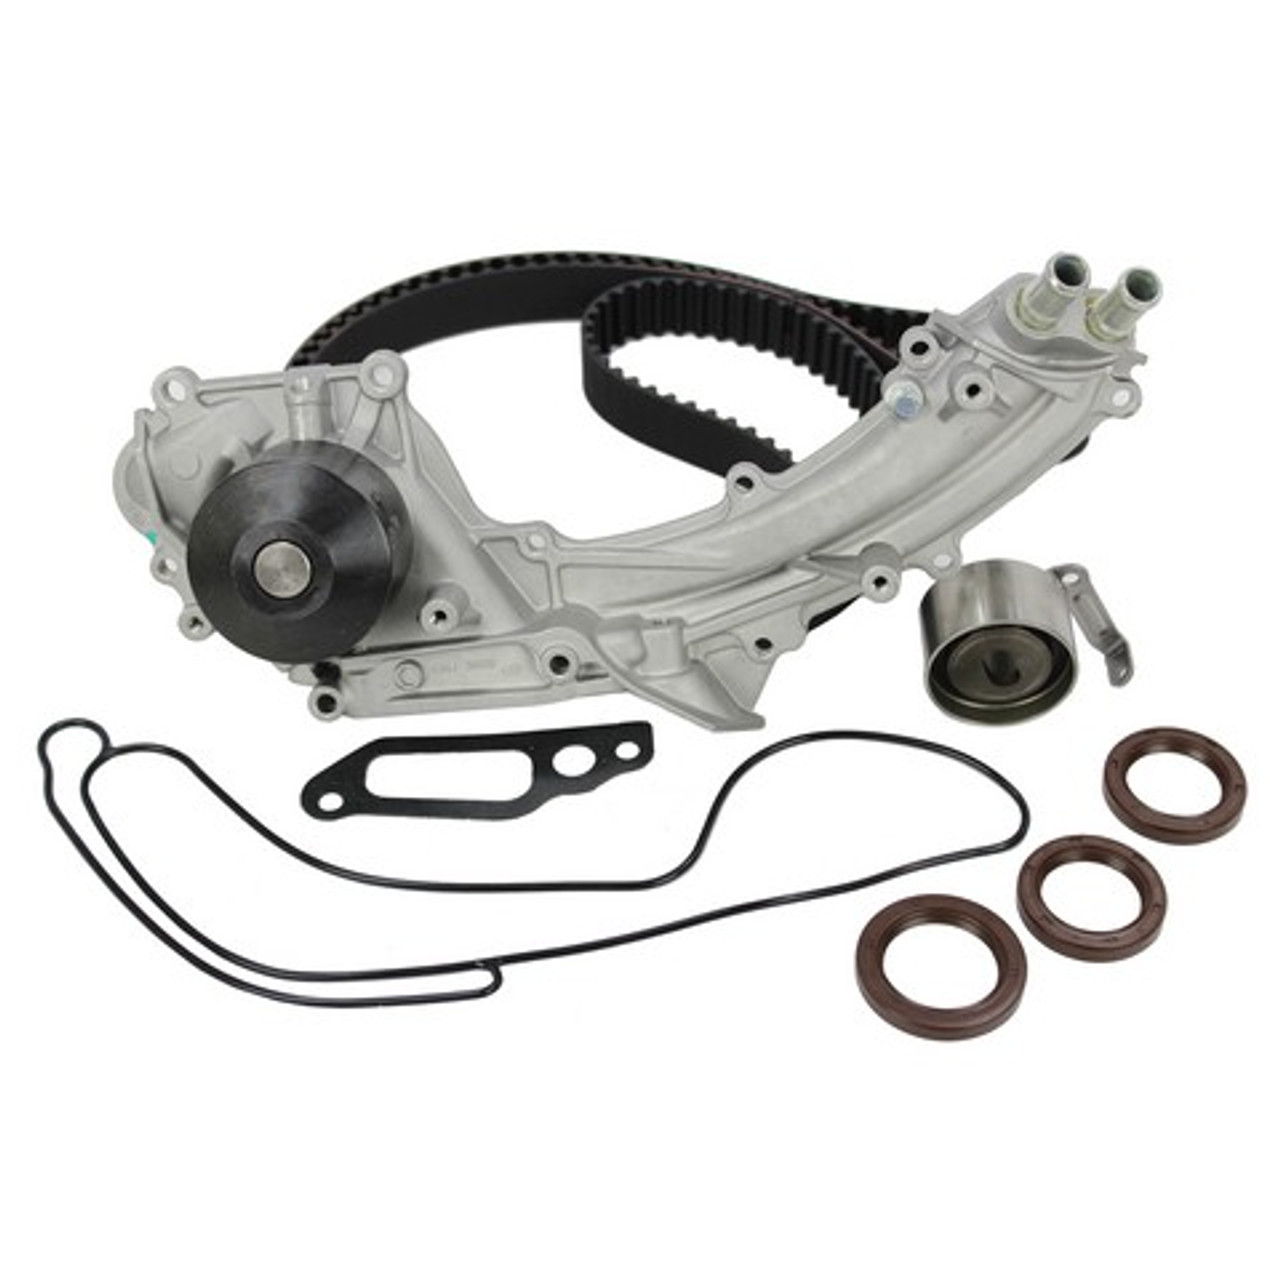 Timing Belt Kit with Water Pump 3.2L 1992 Acura Legend - TBK282WP.2